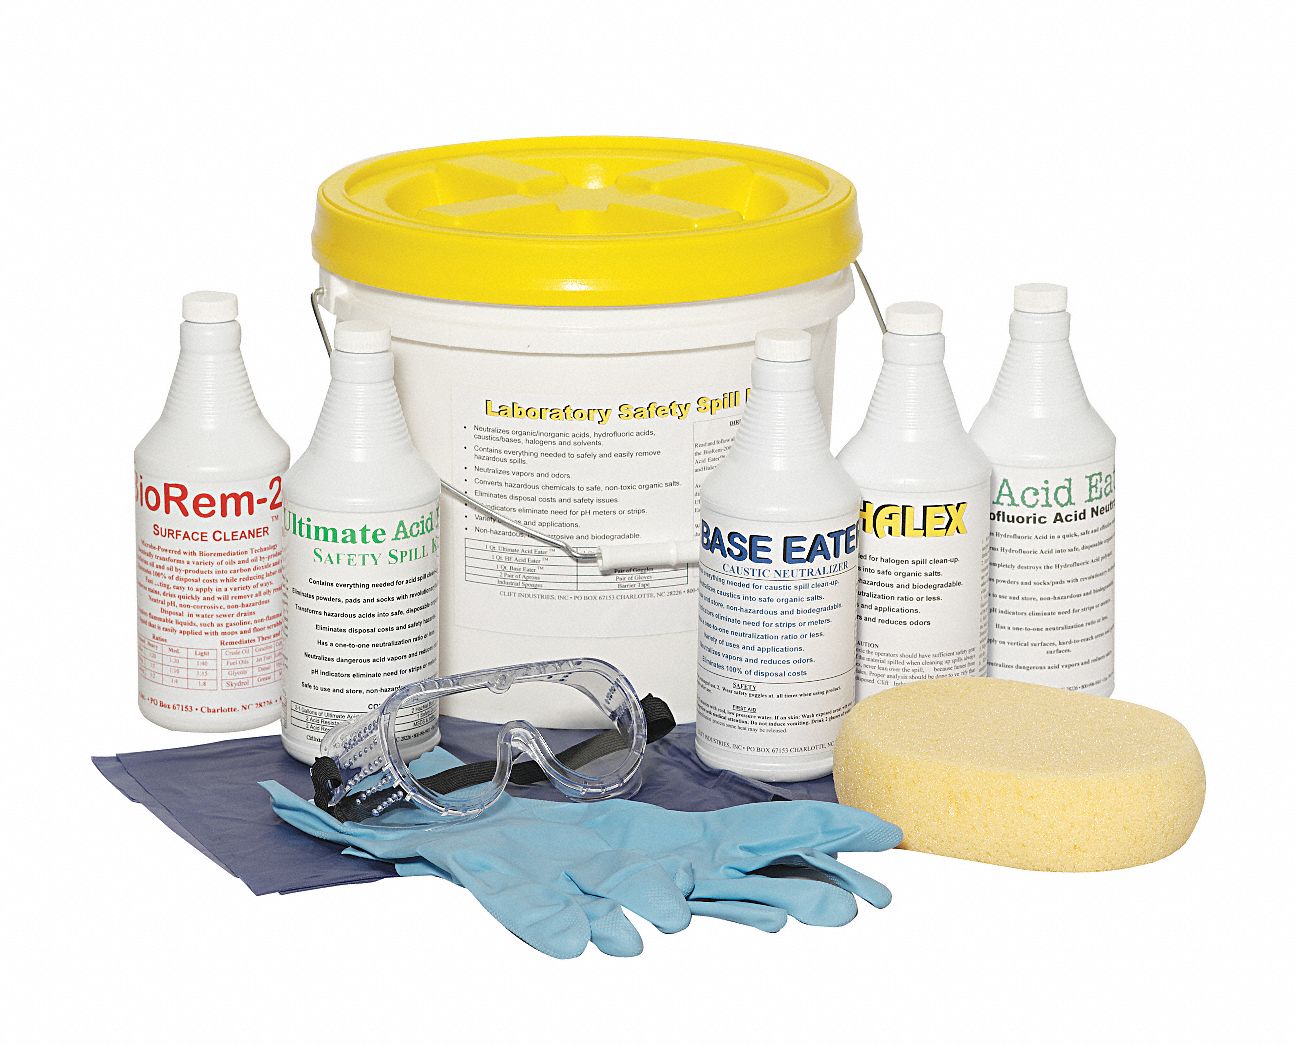 Laboratory Safety Spill Kit: 1 gal Volume Absorbed Per Kit, Multi